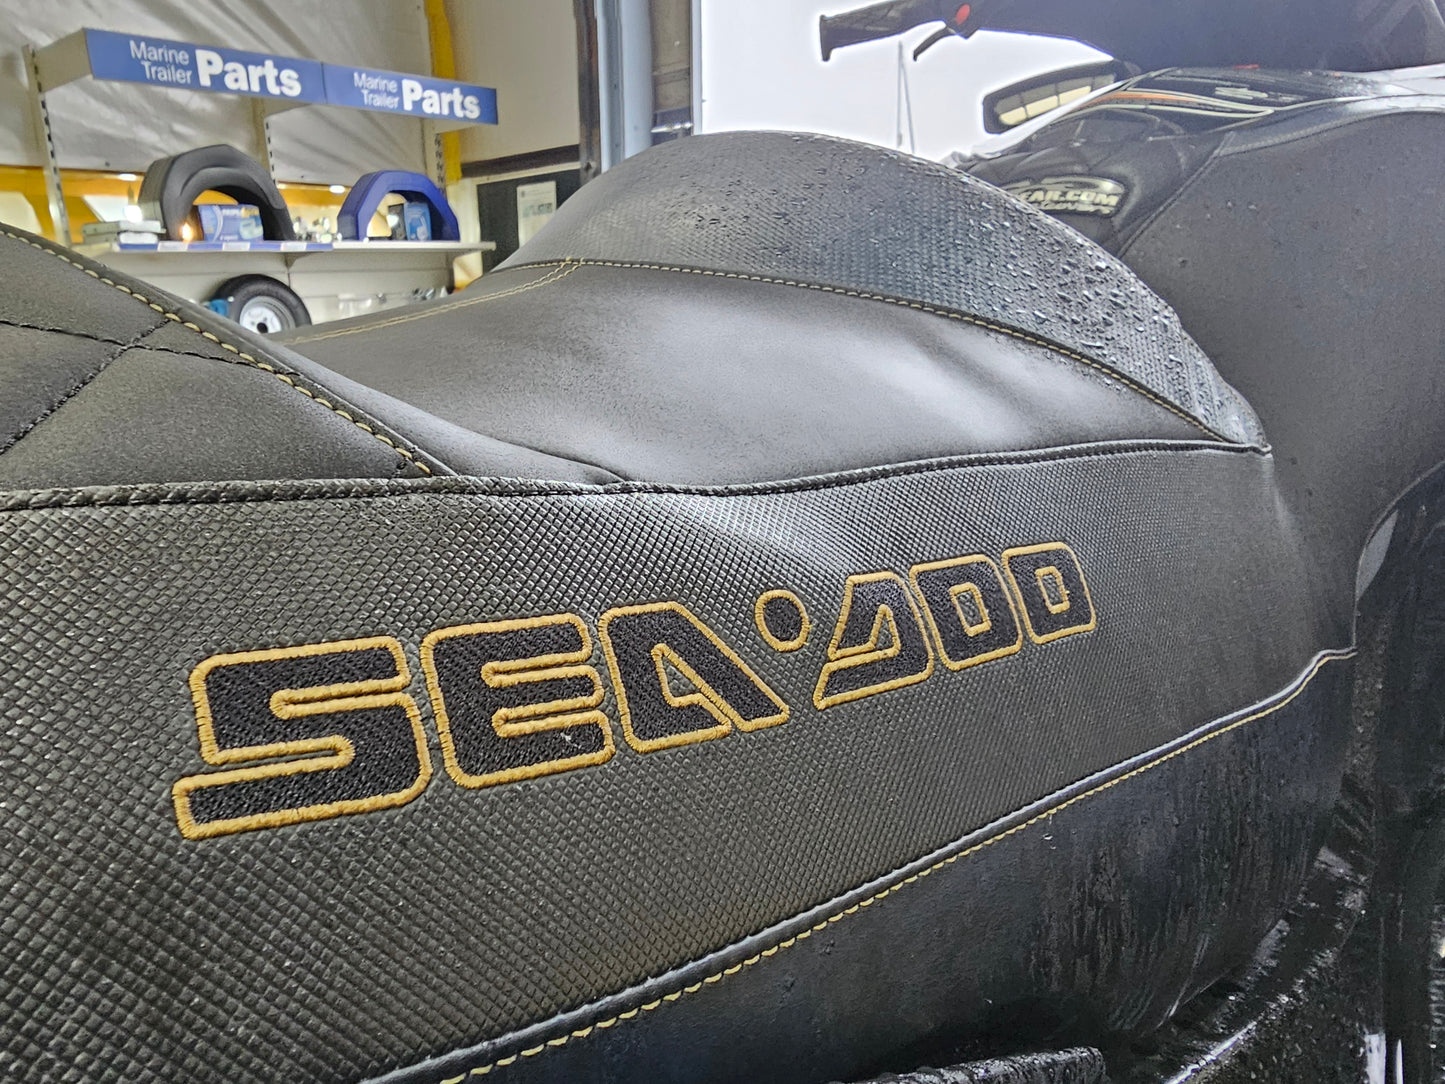 2017 Pre-owned Sea-Doo GTX Limited 300hp